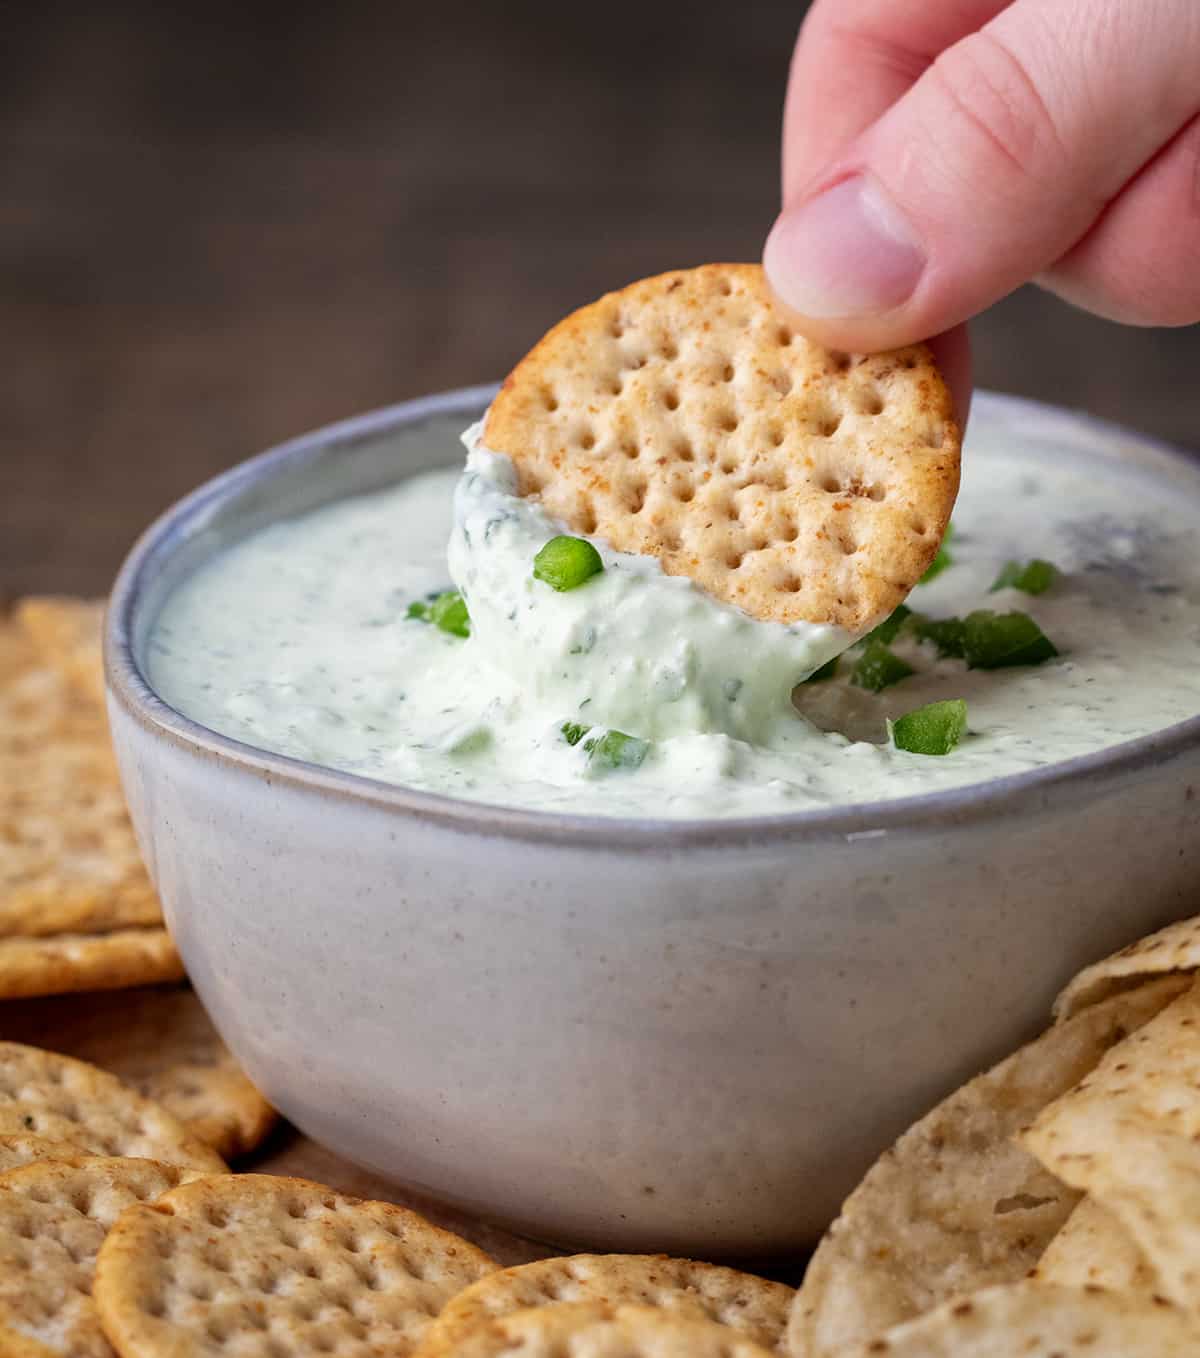 Dipping a chip into Creamy Jalapeno Dip.